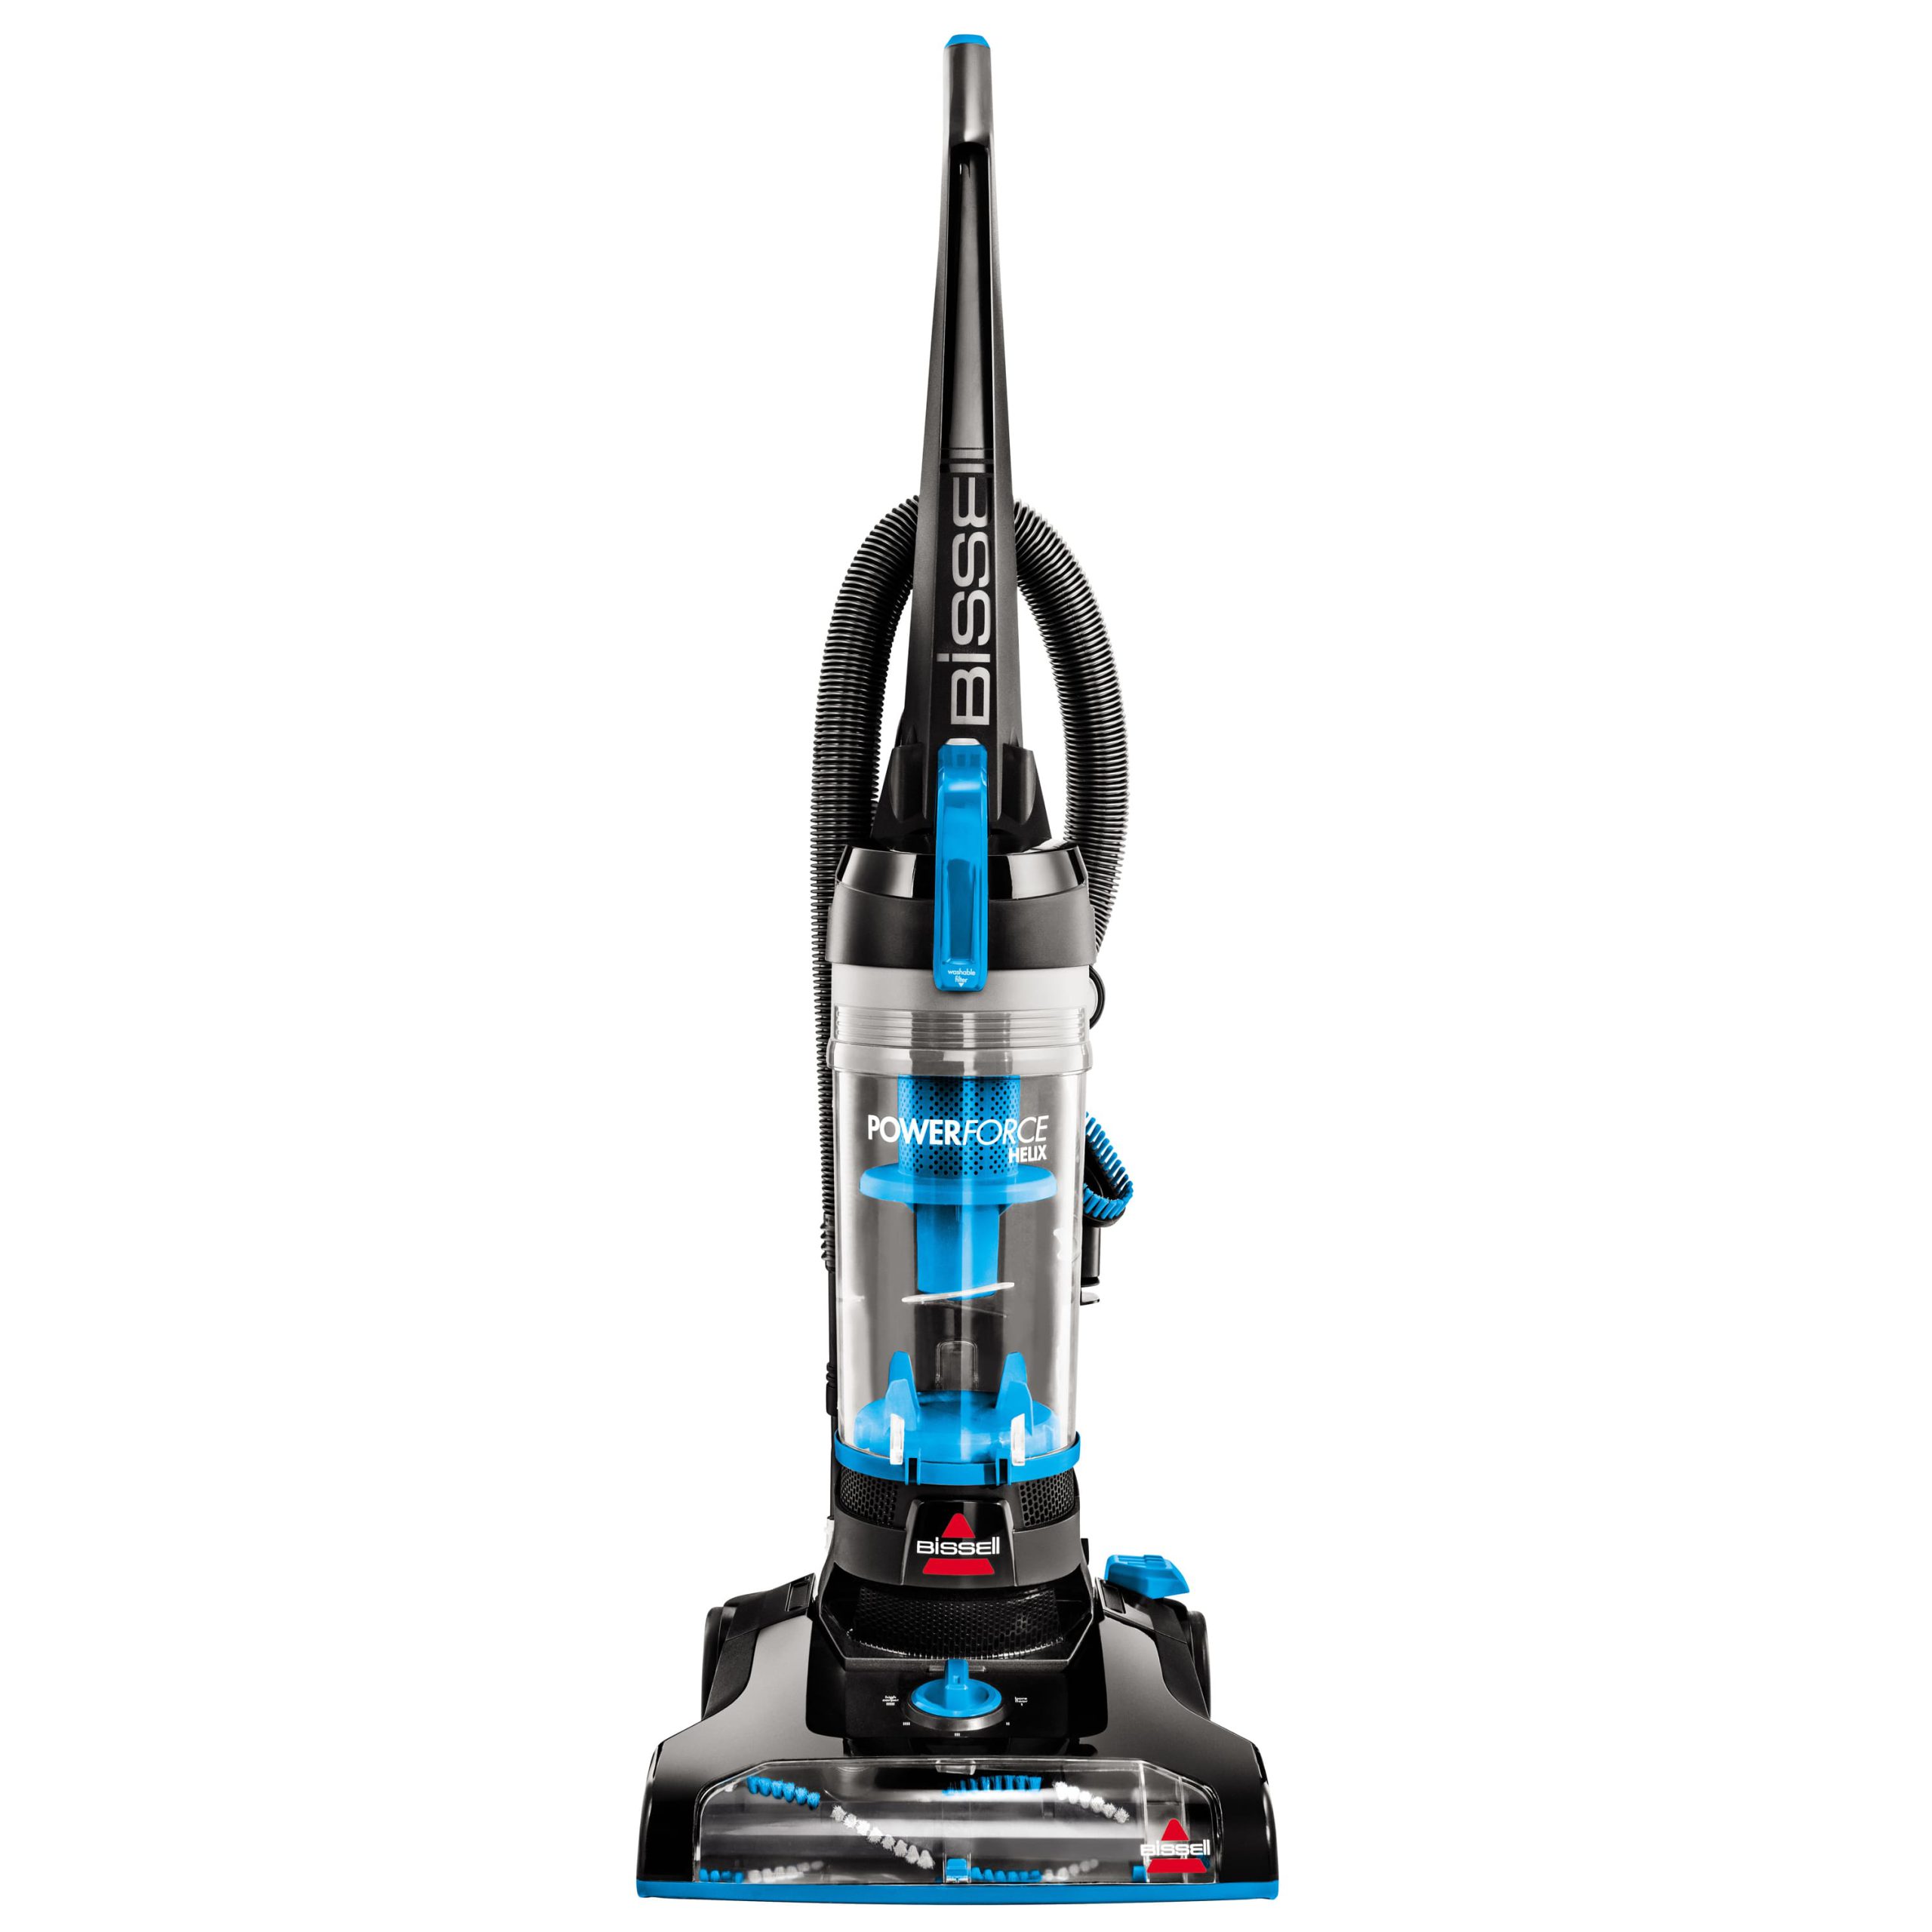 BISSELL Power Force Helix Bagless Upright Vacuum Cleaner